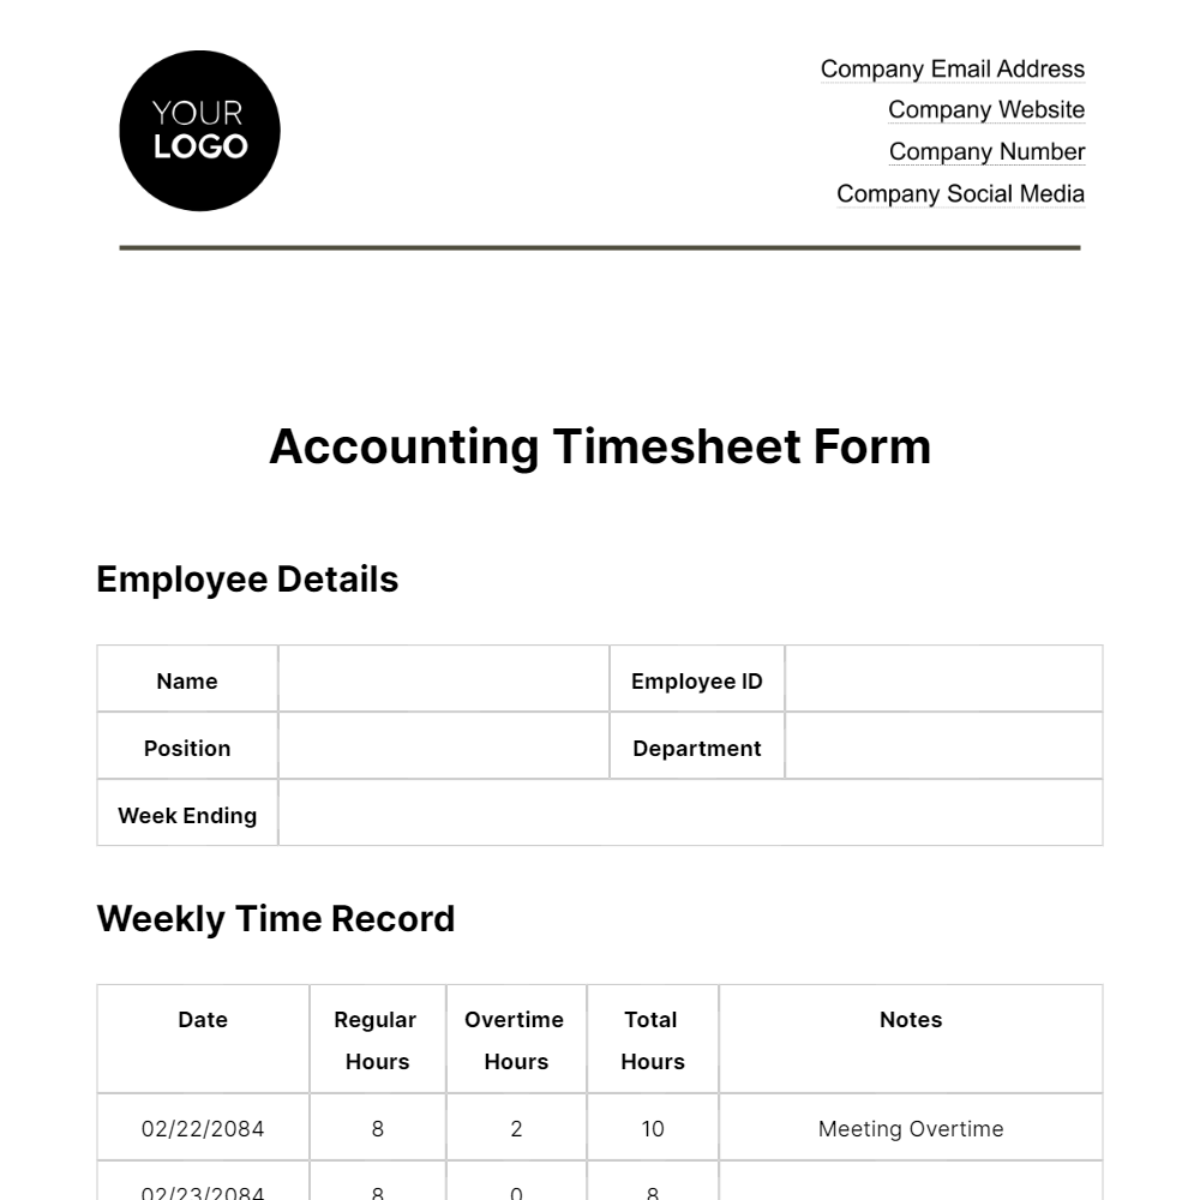 Accounting Timesheet Form Template